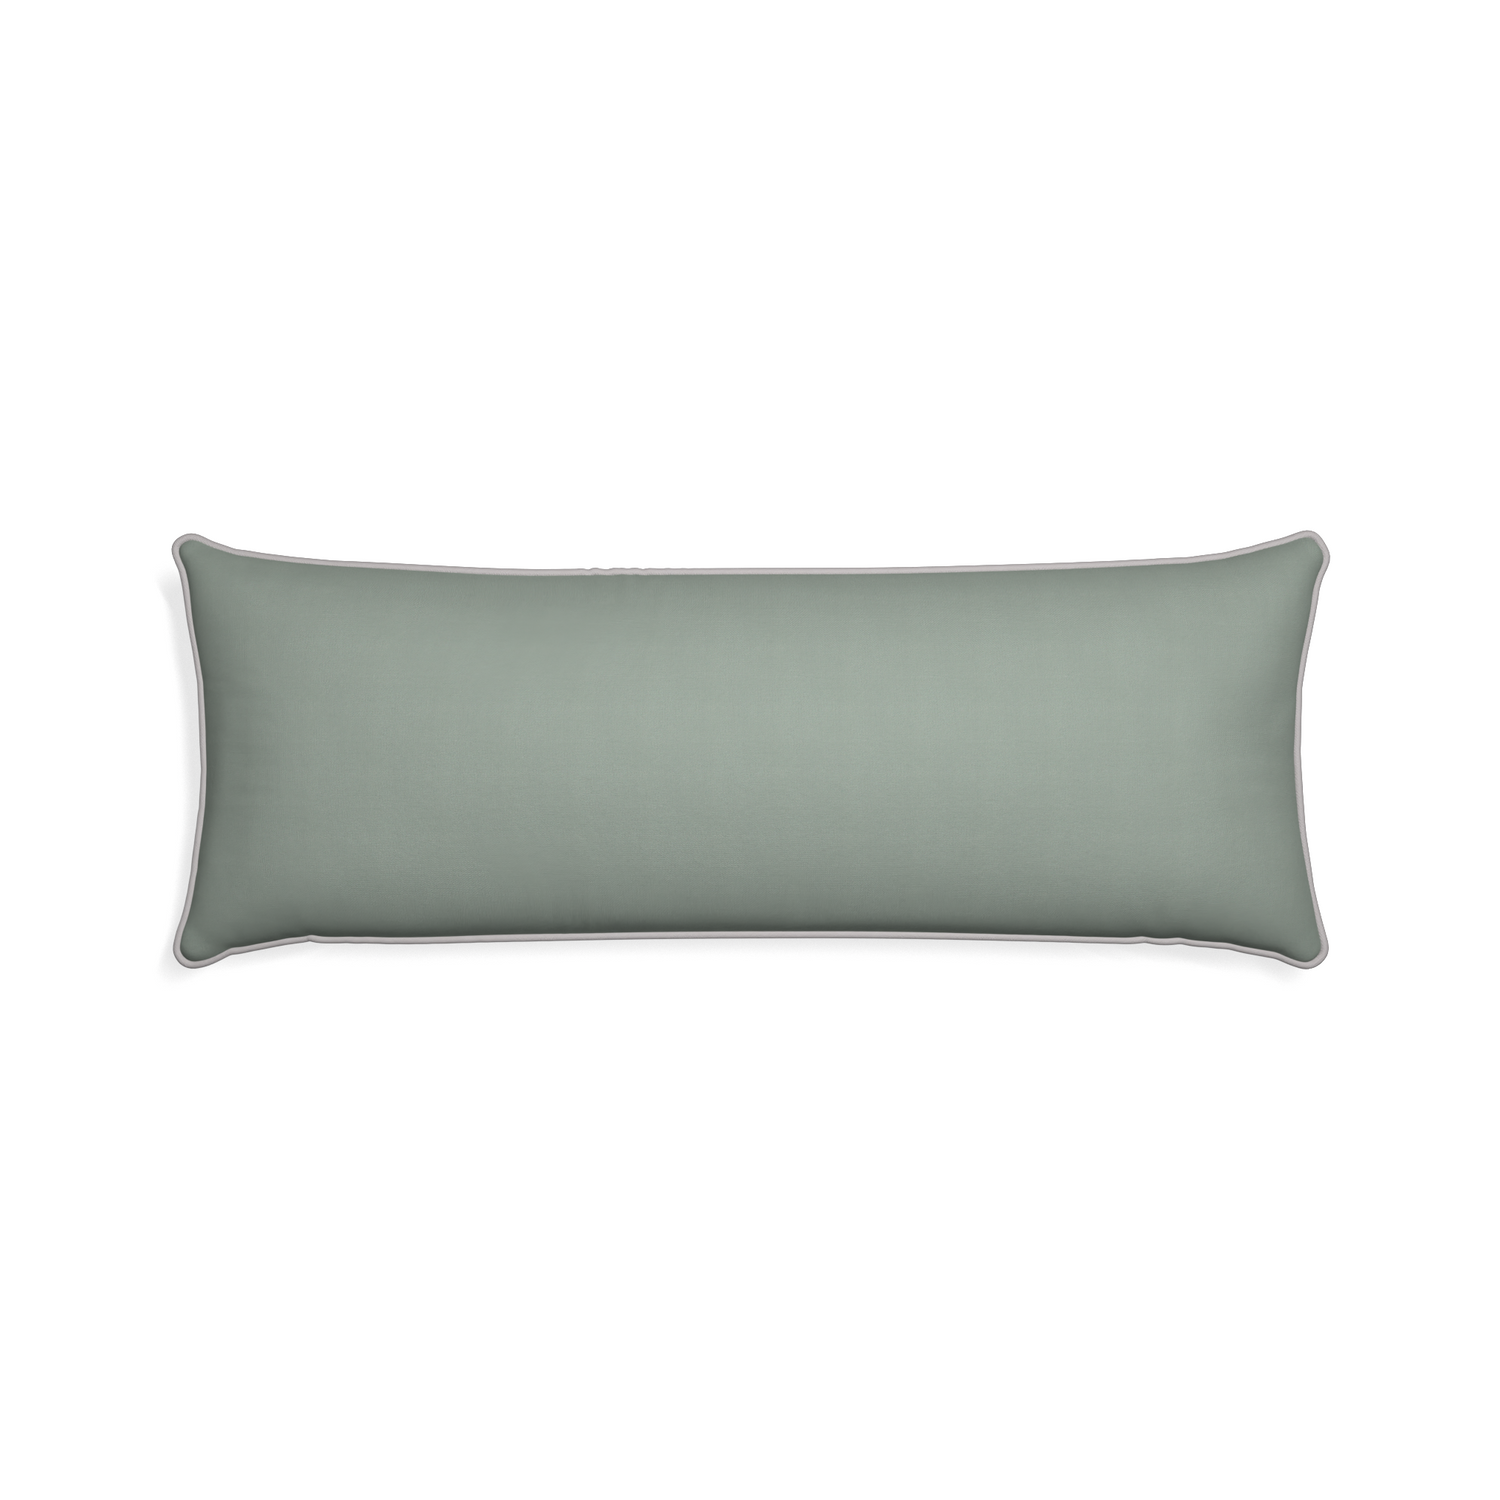 Xl-lumbar sage custom pillow with pebble piping on white background